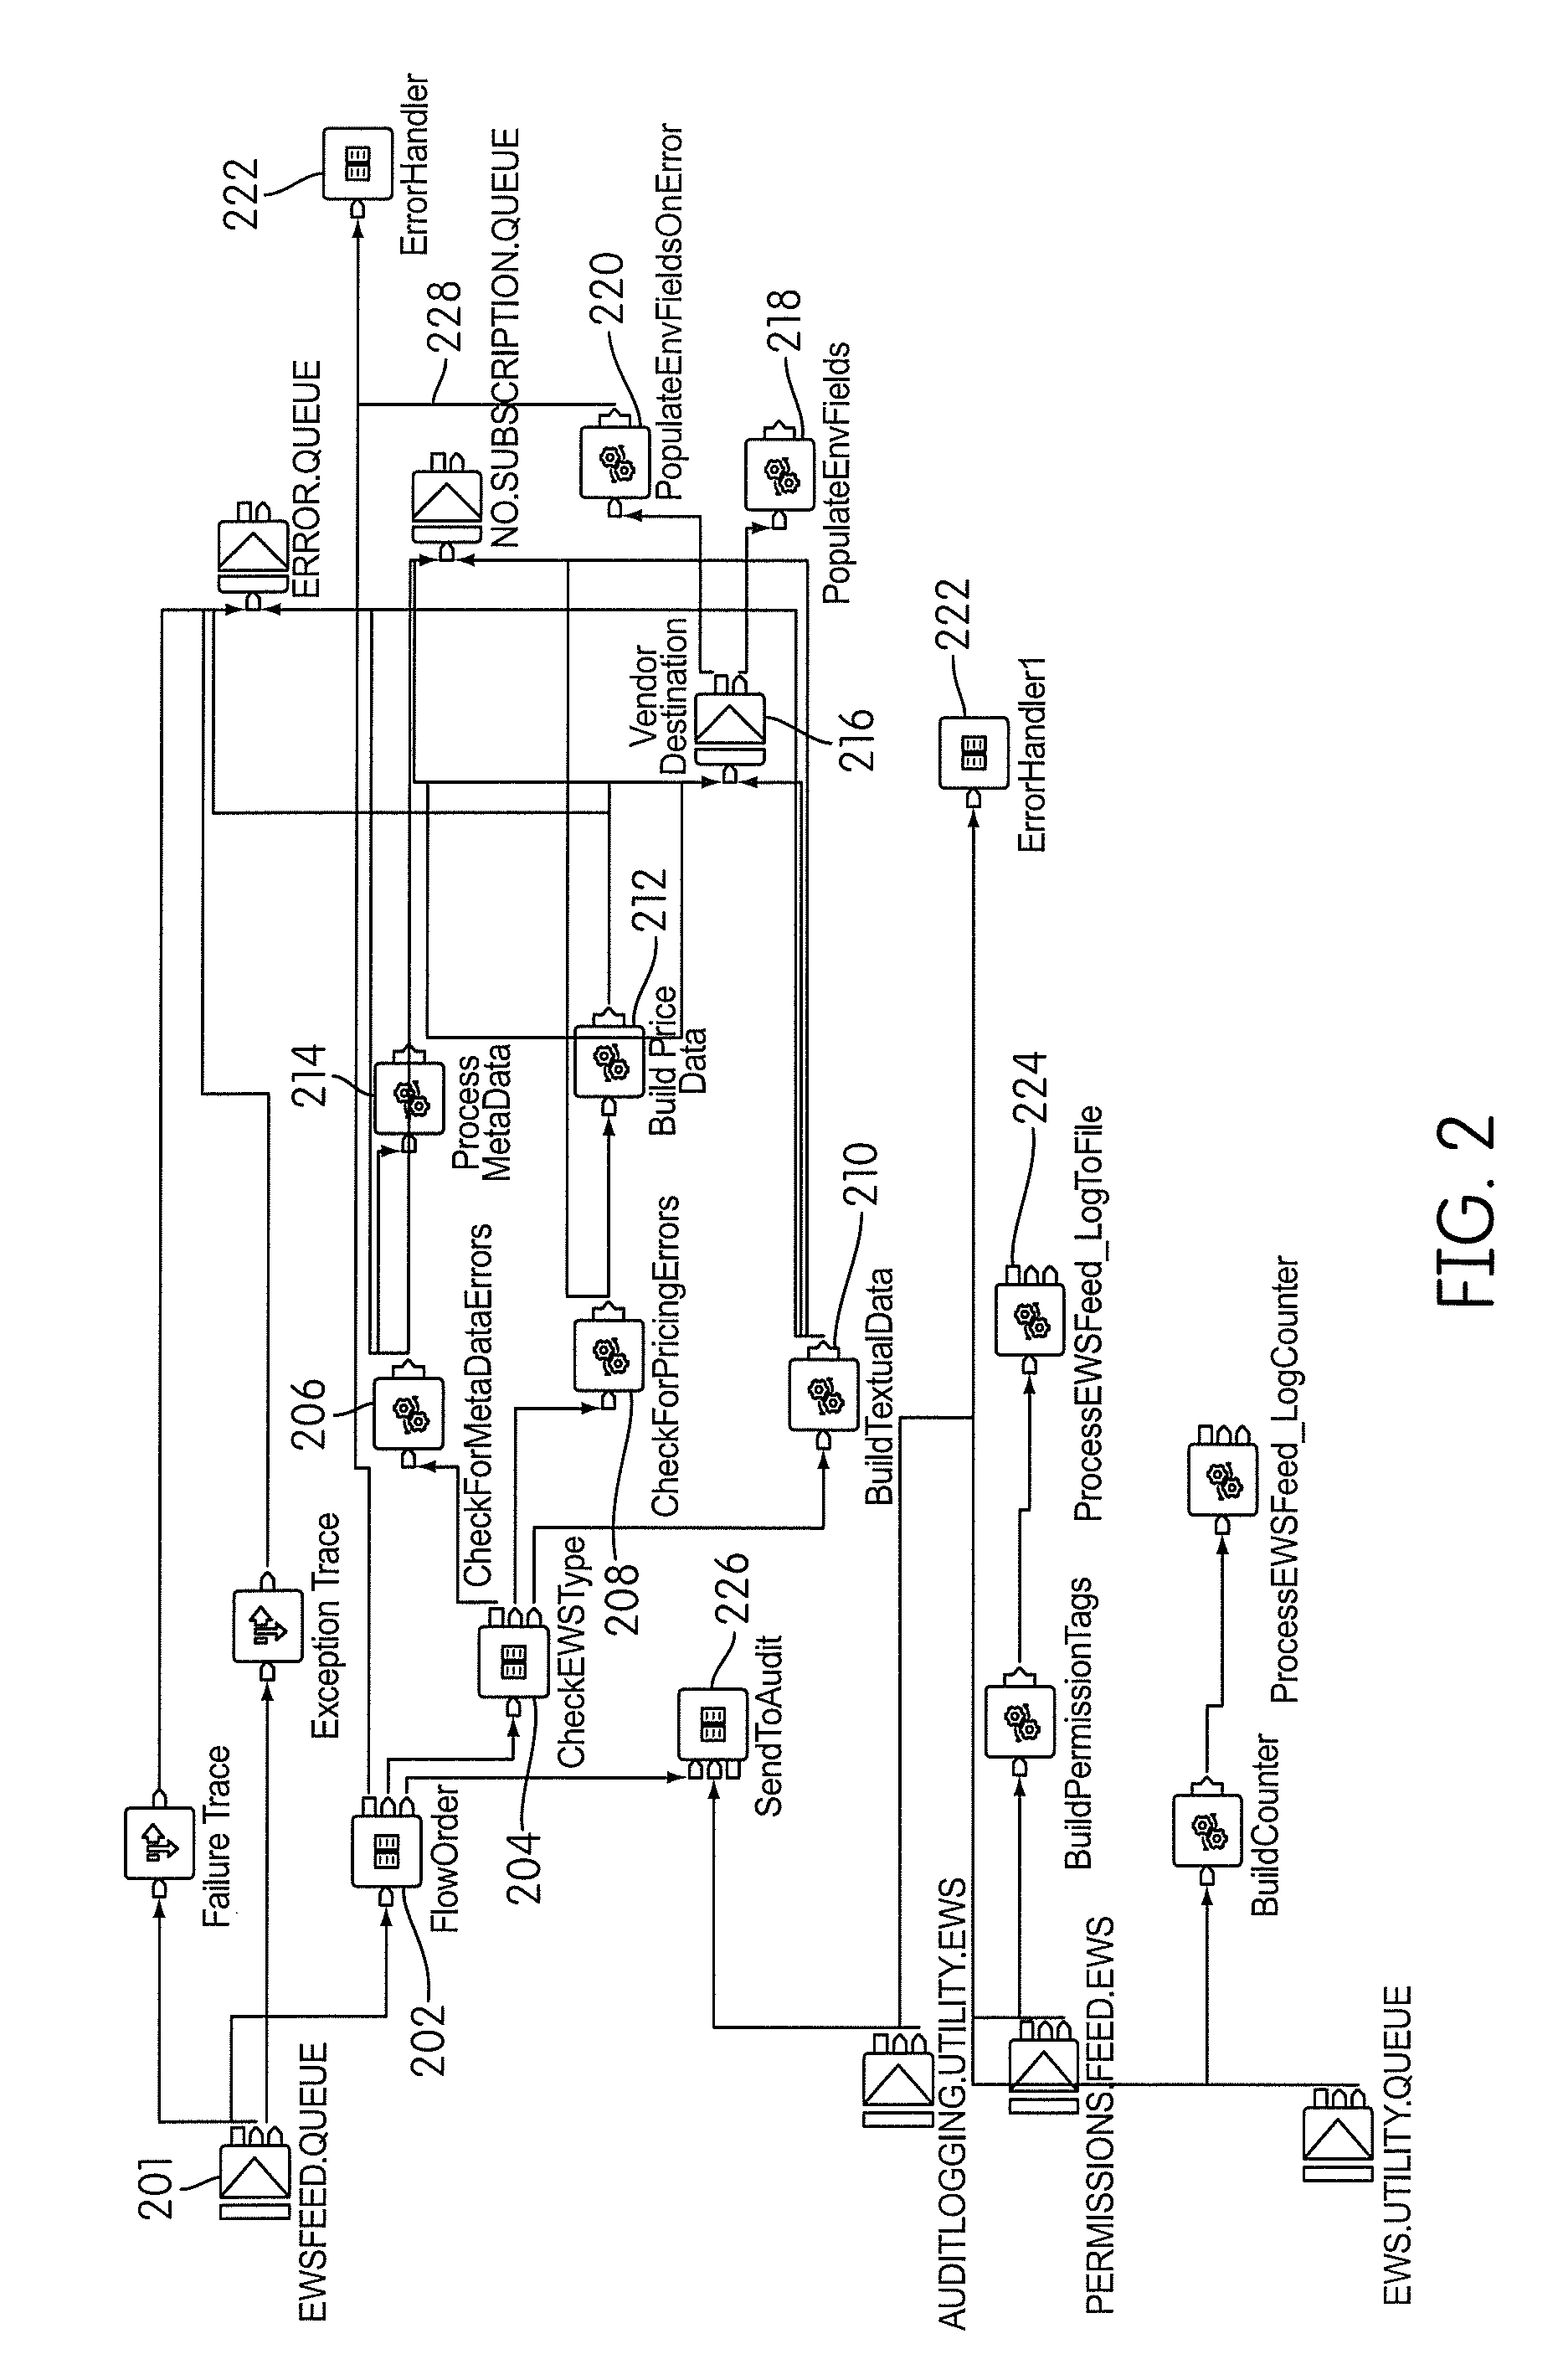 System and Method Using A Simplified XML Format for Real-Time Content Publication